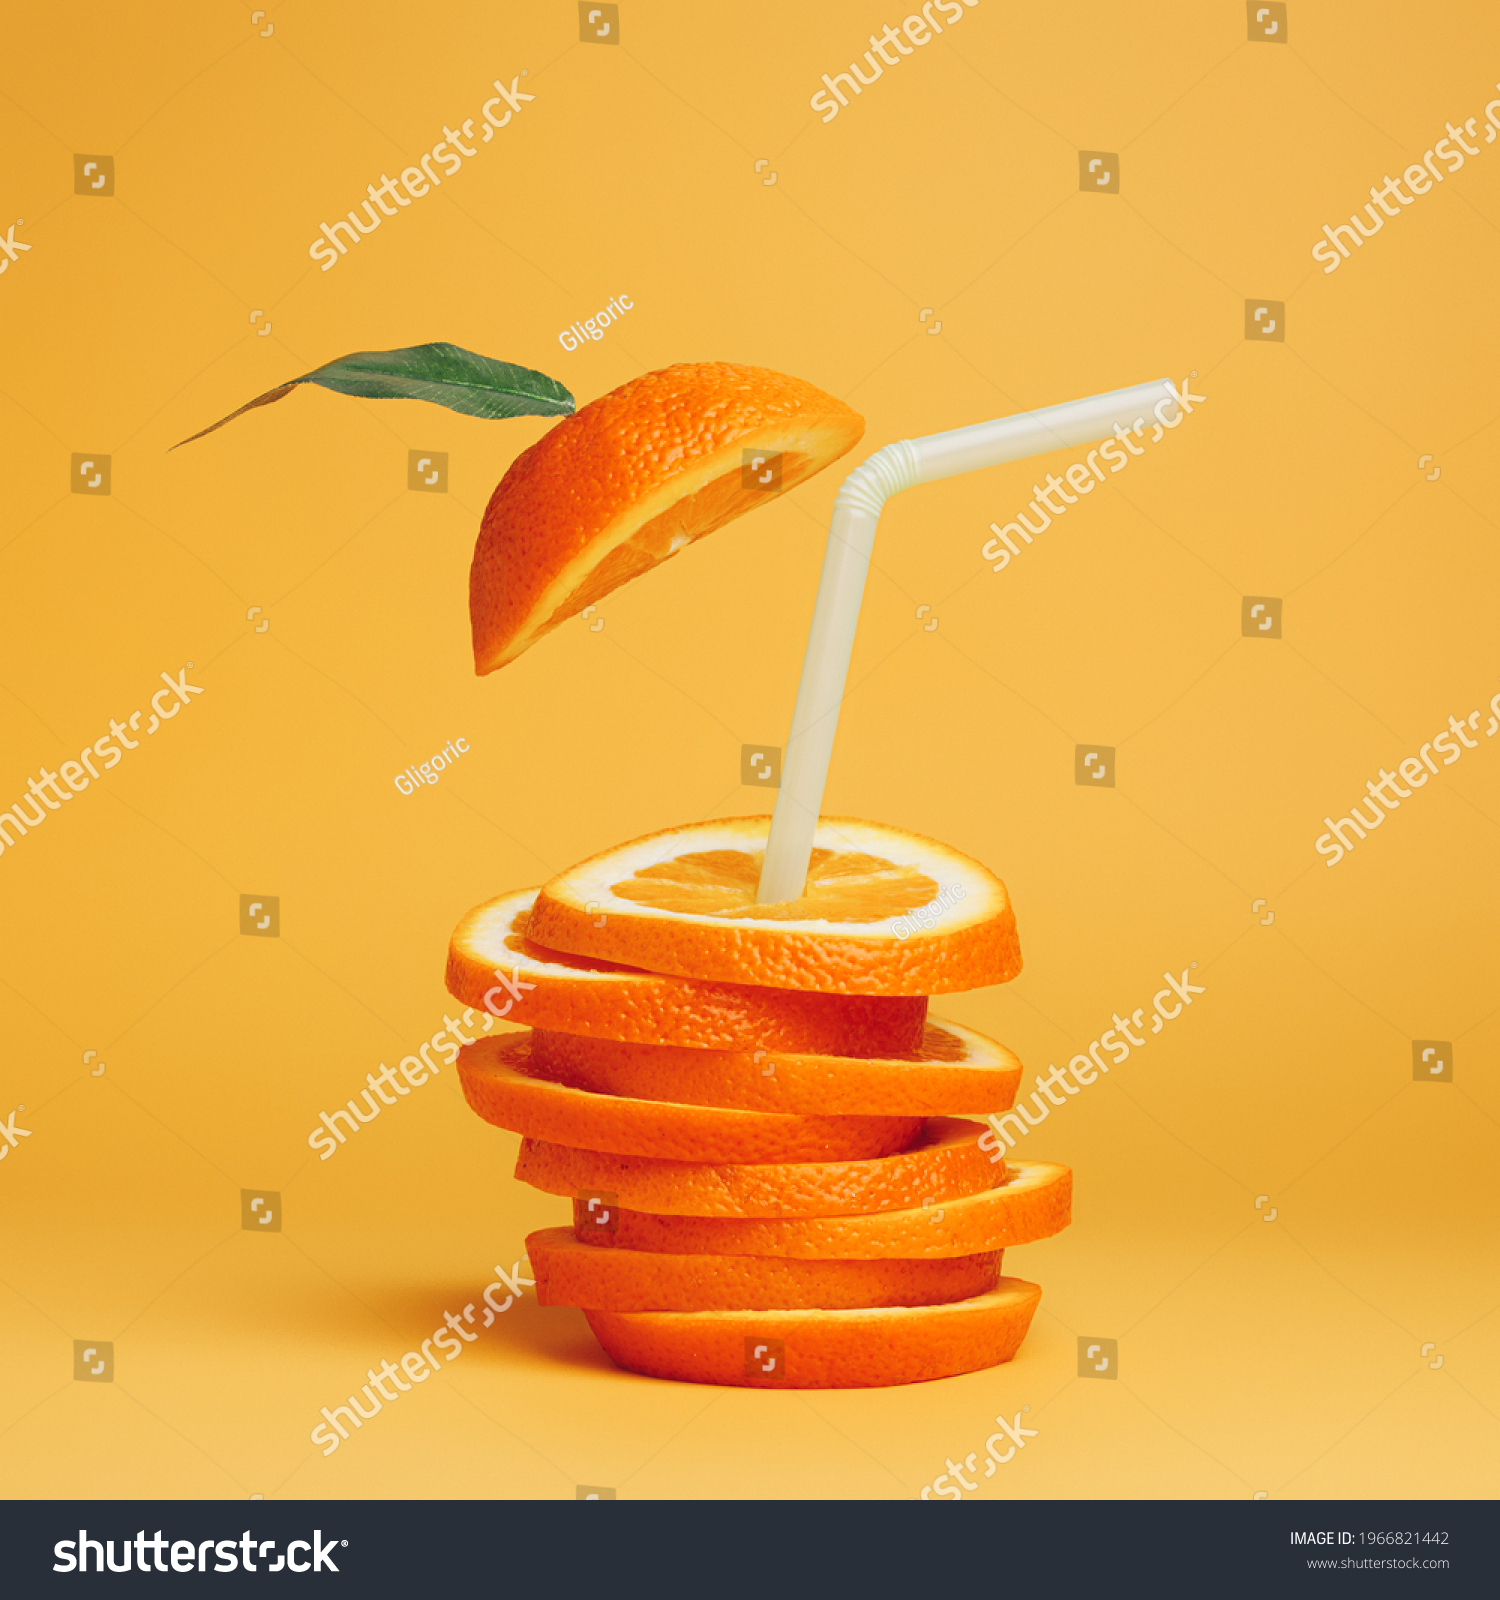 Summer composition with fresh stacked orange slices and straw on vibrant orange background. Creative healthy diet concept. Organic tropical fruit juice. #1966821442